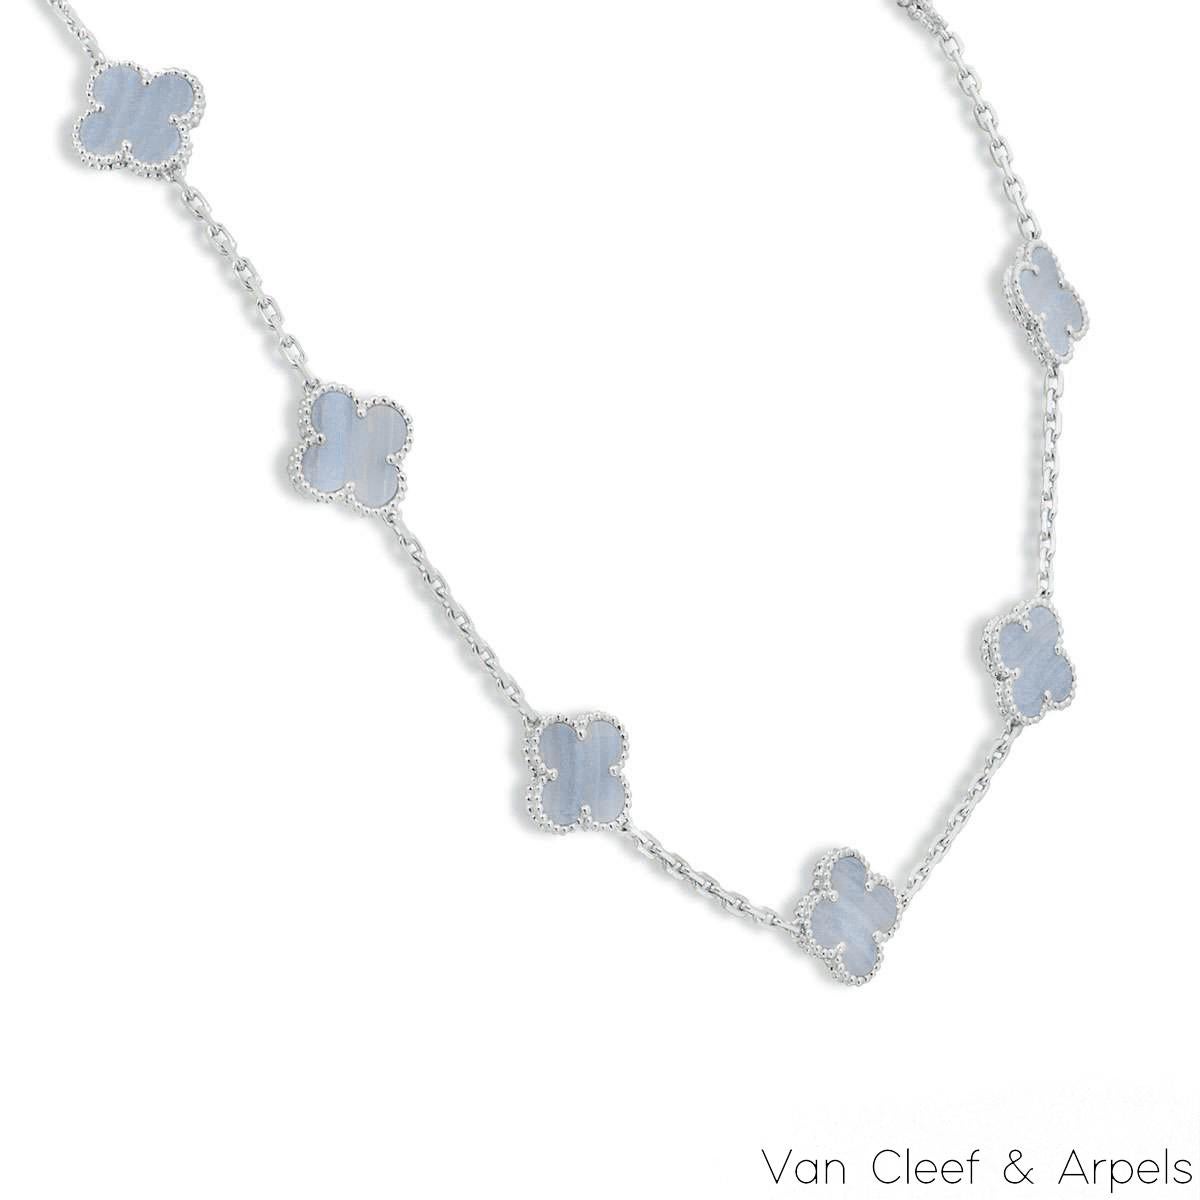 A beautiful 18k white gold chalcedony necklace by Van Cleef & Arpels from the Vintage Alhambra collection. The necklace has 10 motifs, each set with a chalcedony inlay and complemented by a beaded outer edge. The necklace measures 16.5 inches in